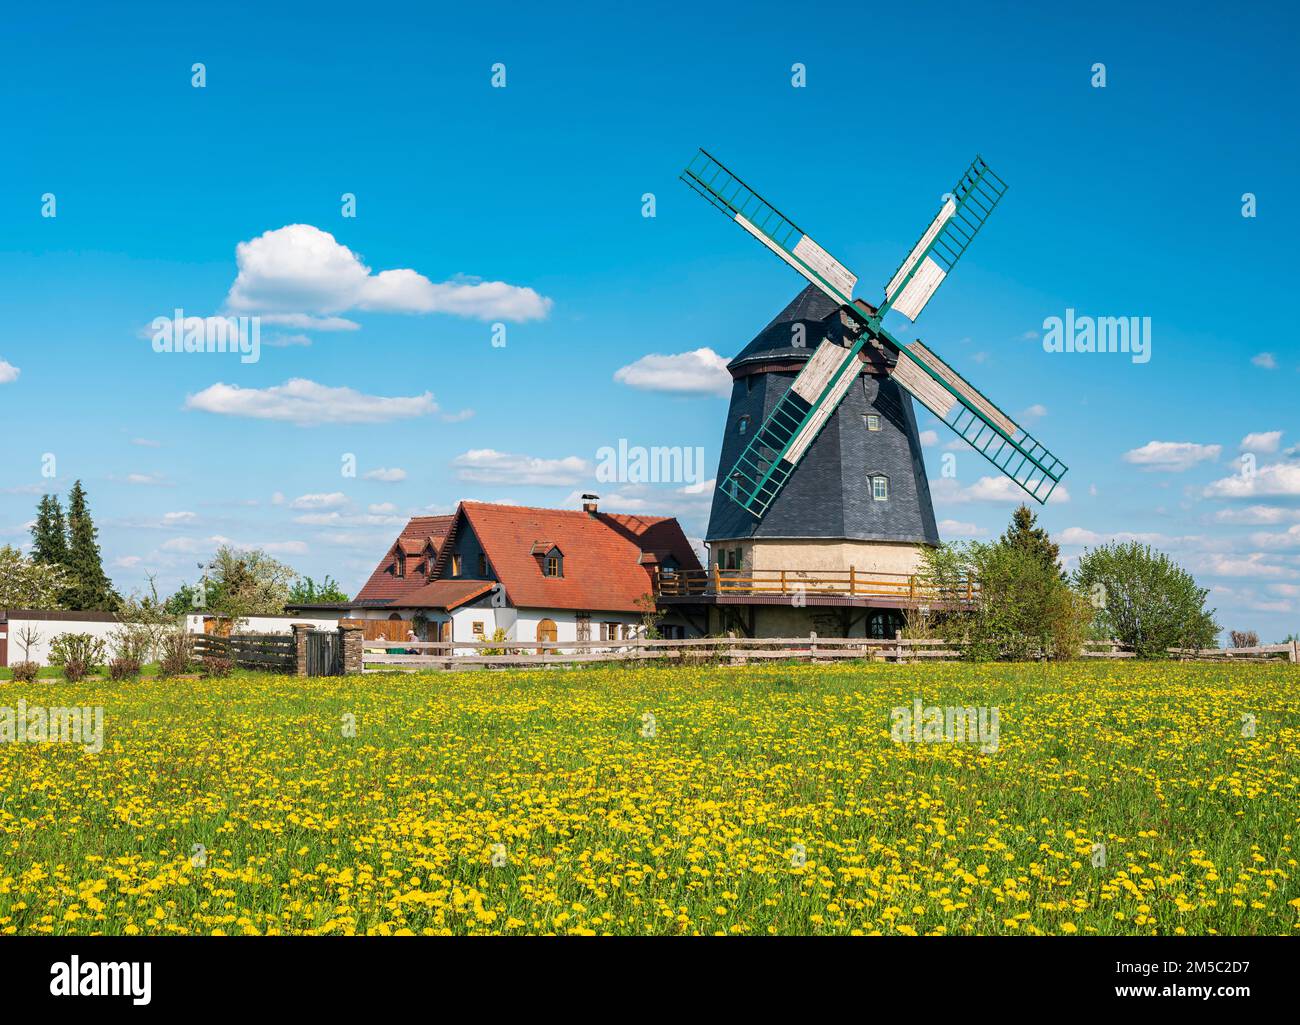 Knapp mill, gallery Dutch mill, windmill in spring on a green meadow with flowering dandelions, Linda near Neustadt an der Orla, Thuringia, Germany Stock Photo